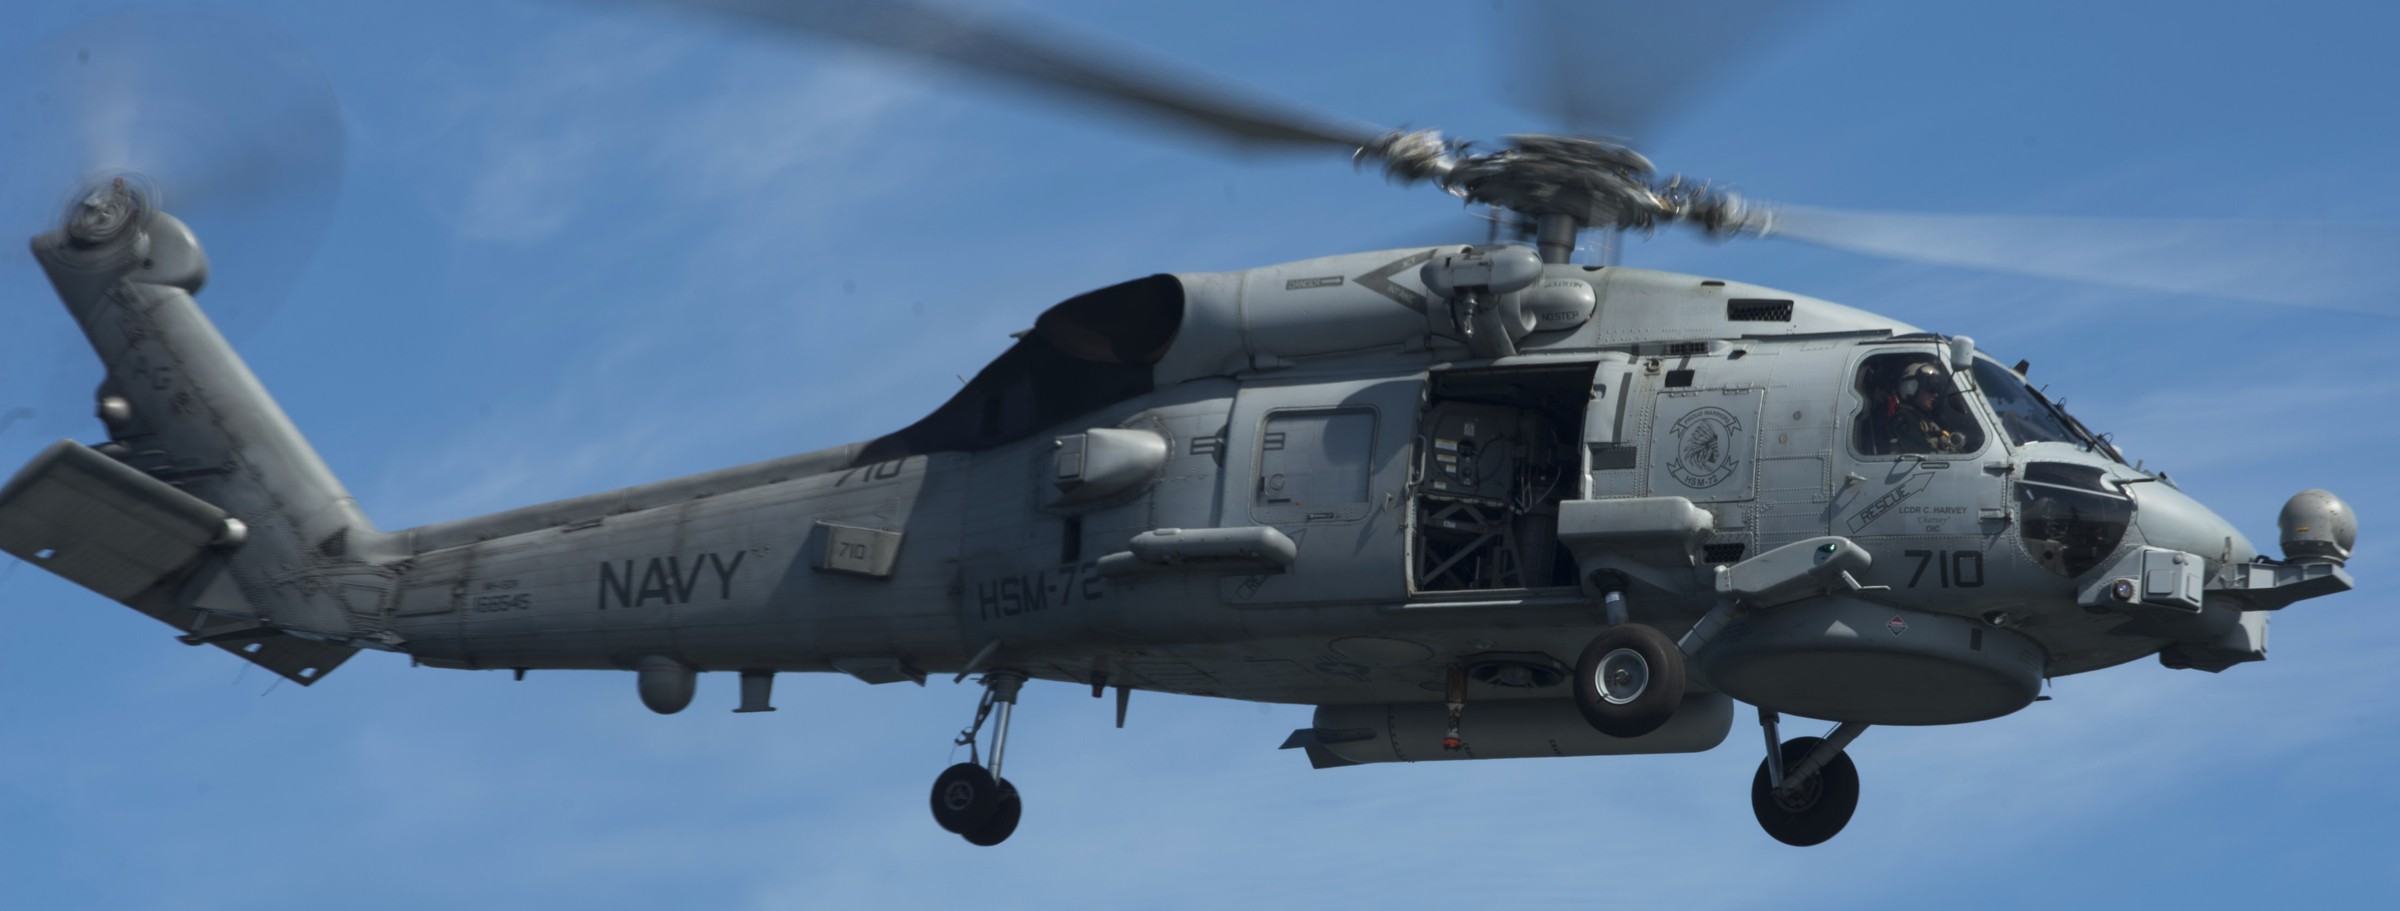 hsm-72 proud warriors helicopter maritime strike squadron us navy mh-60r seahawk 2014 32